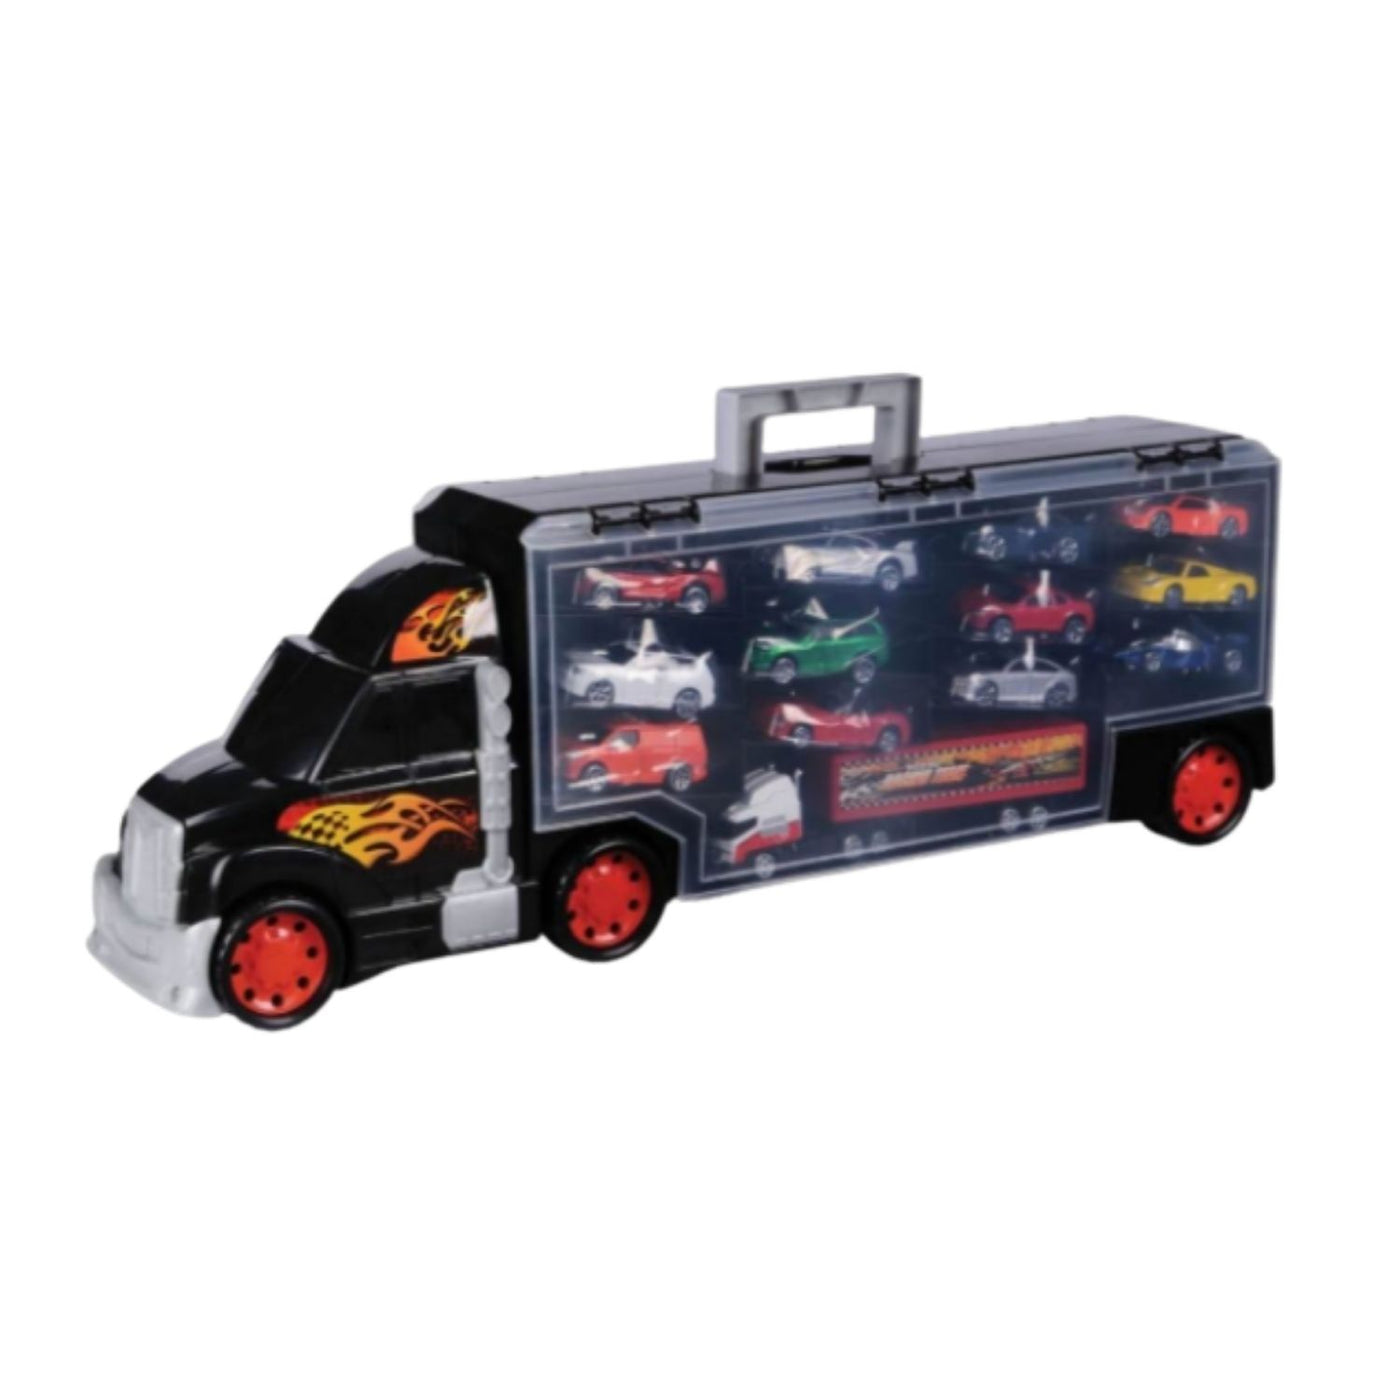 Jeffrey Stein Sales - Hot Wheels Collection Case (Holds 30 cars)